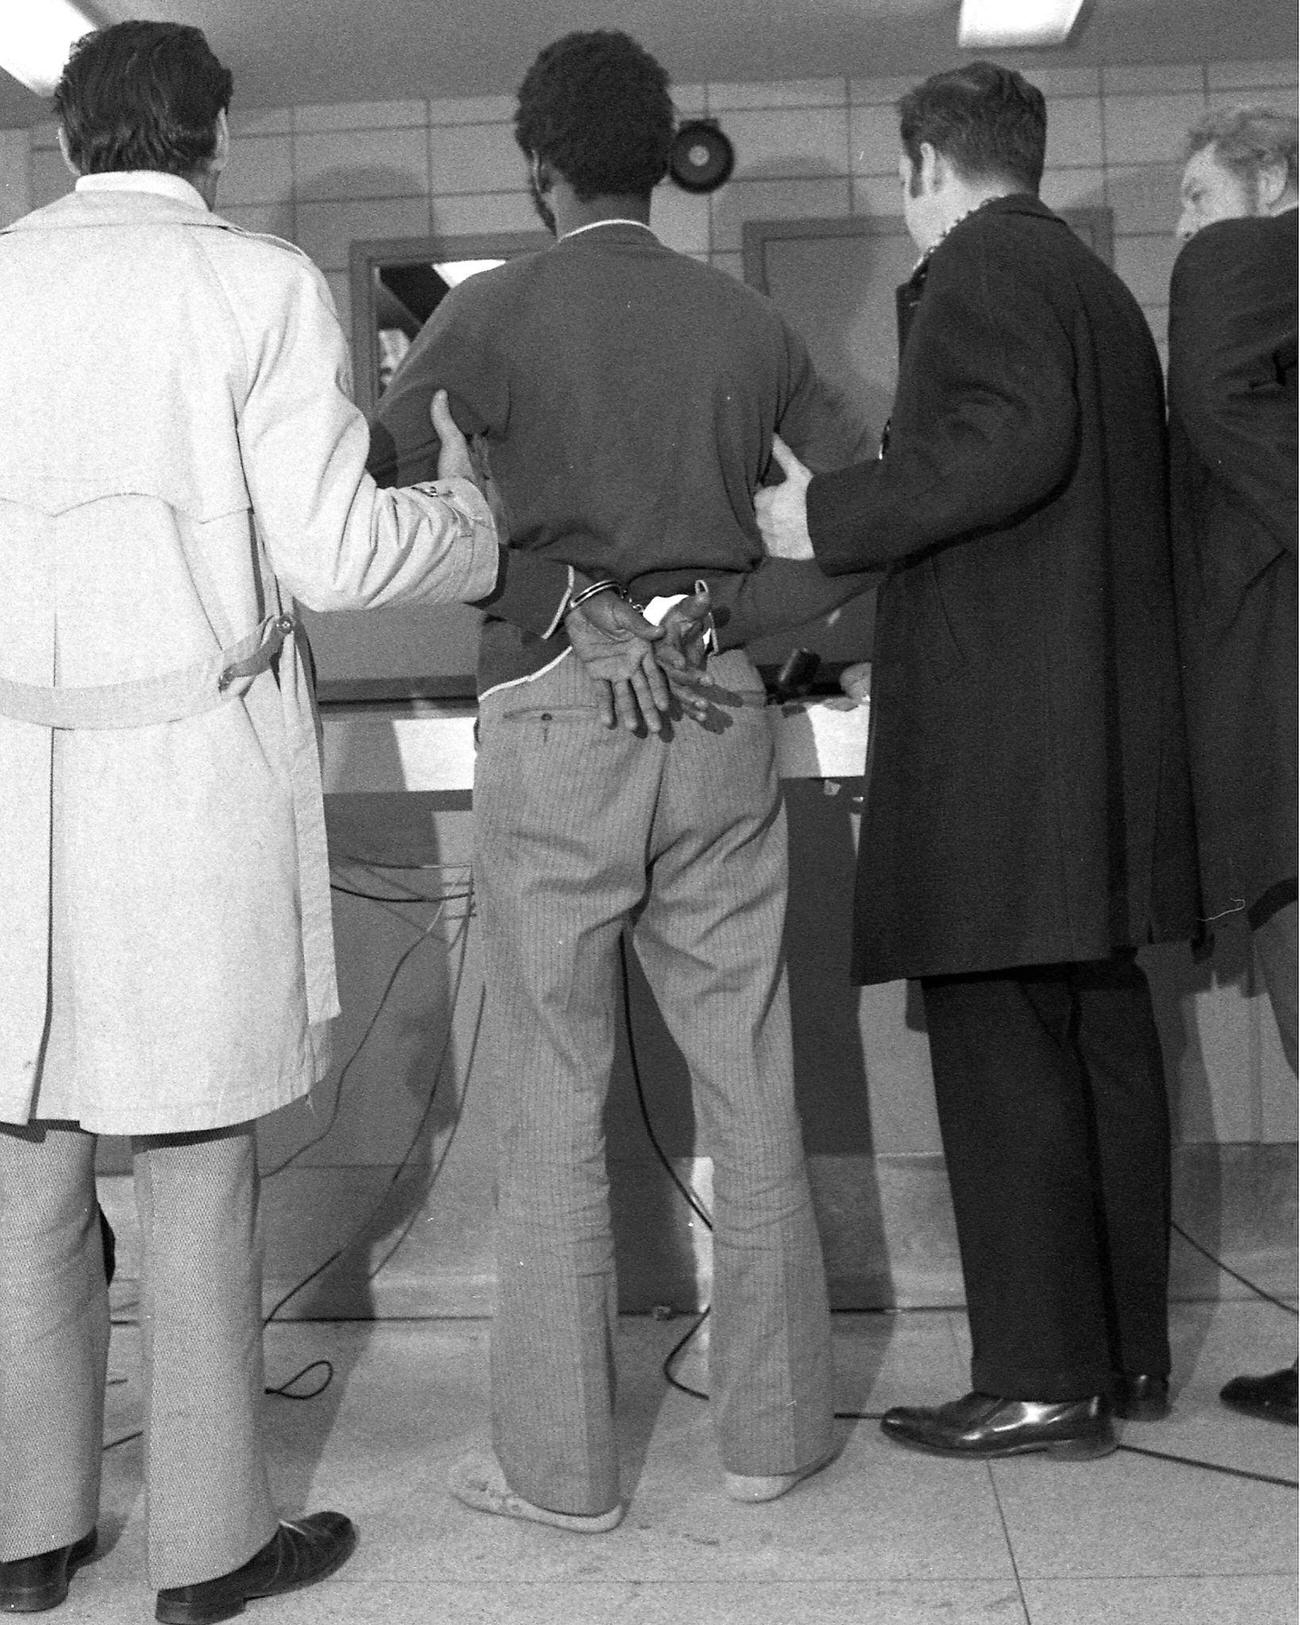 Salih Ali Agdulah Booked For Fatal Shooting Of Cop In Brooklyn Hostage Siege, 1973